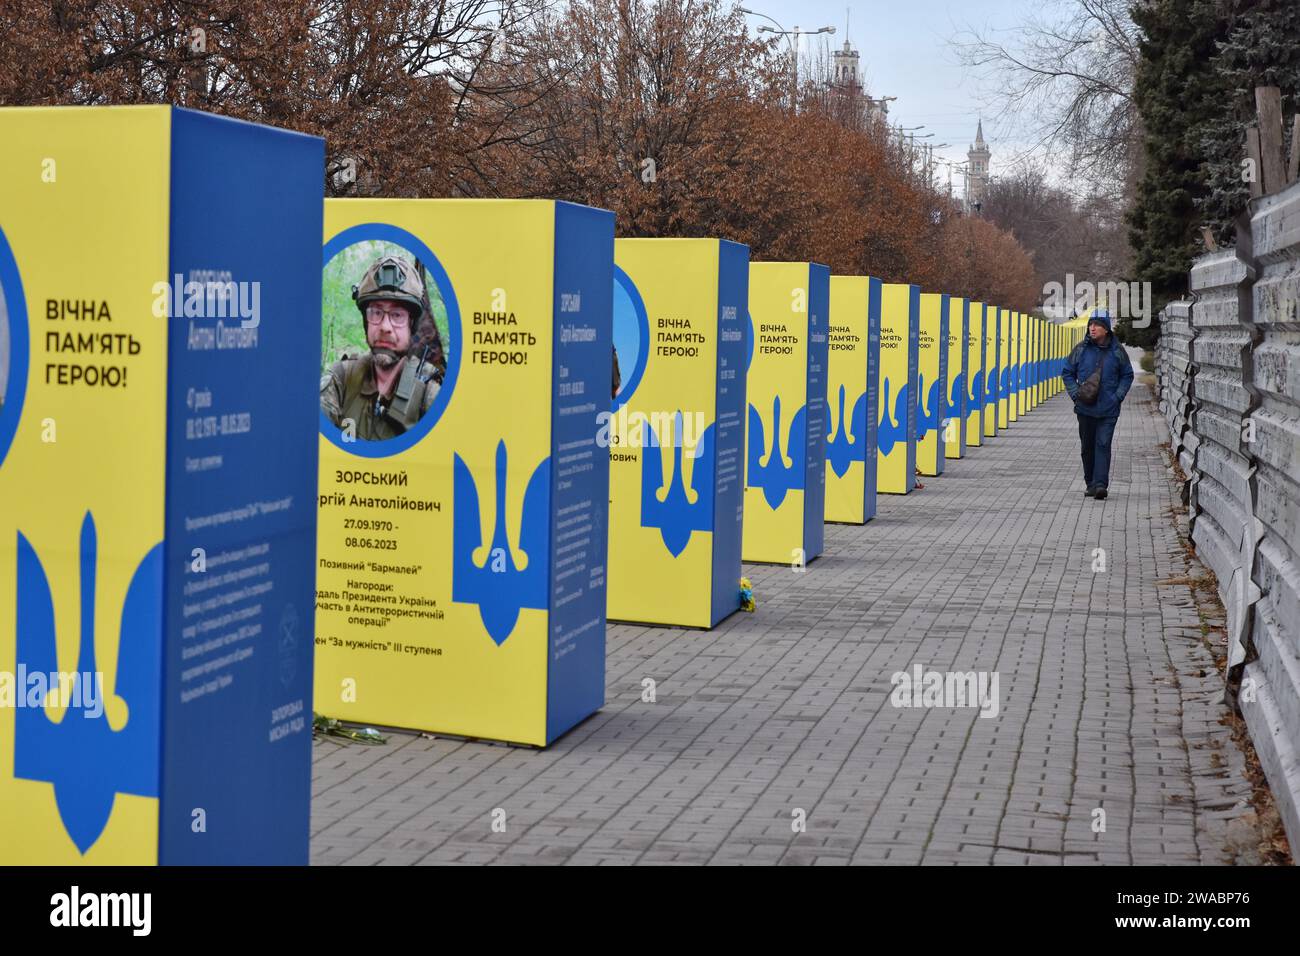 A man walks past stands of portraits of fallen Ukrainian soldiers in the center of Zaporizhzhia. Ukrainian President Volodymyr Zelenskiy said Russian forces are suffering heavy losses and the notion that Moscow is winning the nearly two-year-old war is only a 'feeling' not based on reality. There was no response to a request for comment from Russian officials on Zelenskiy's remarks. Russian officials have said Western estimates of Russian death tolls are vastly exaggerated and almost always underestimate Ukrainian losses. Stock Photo